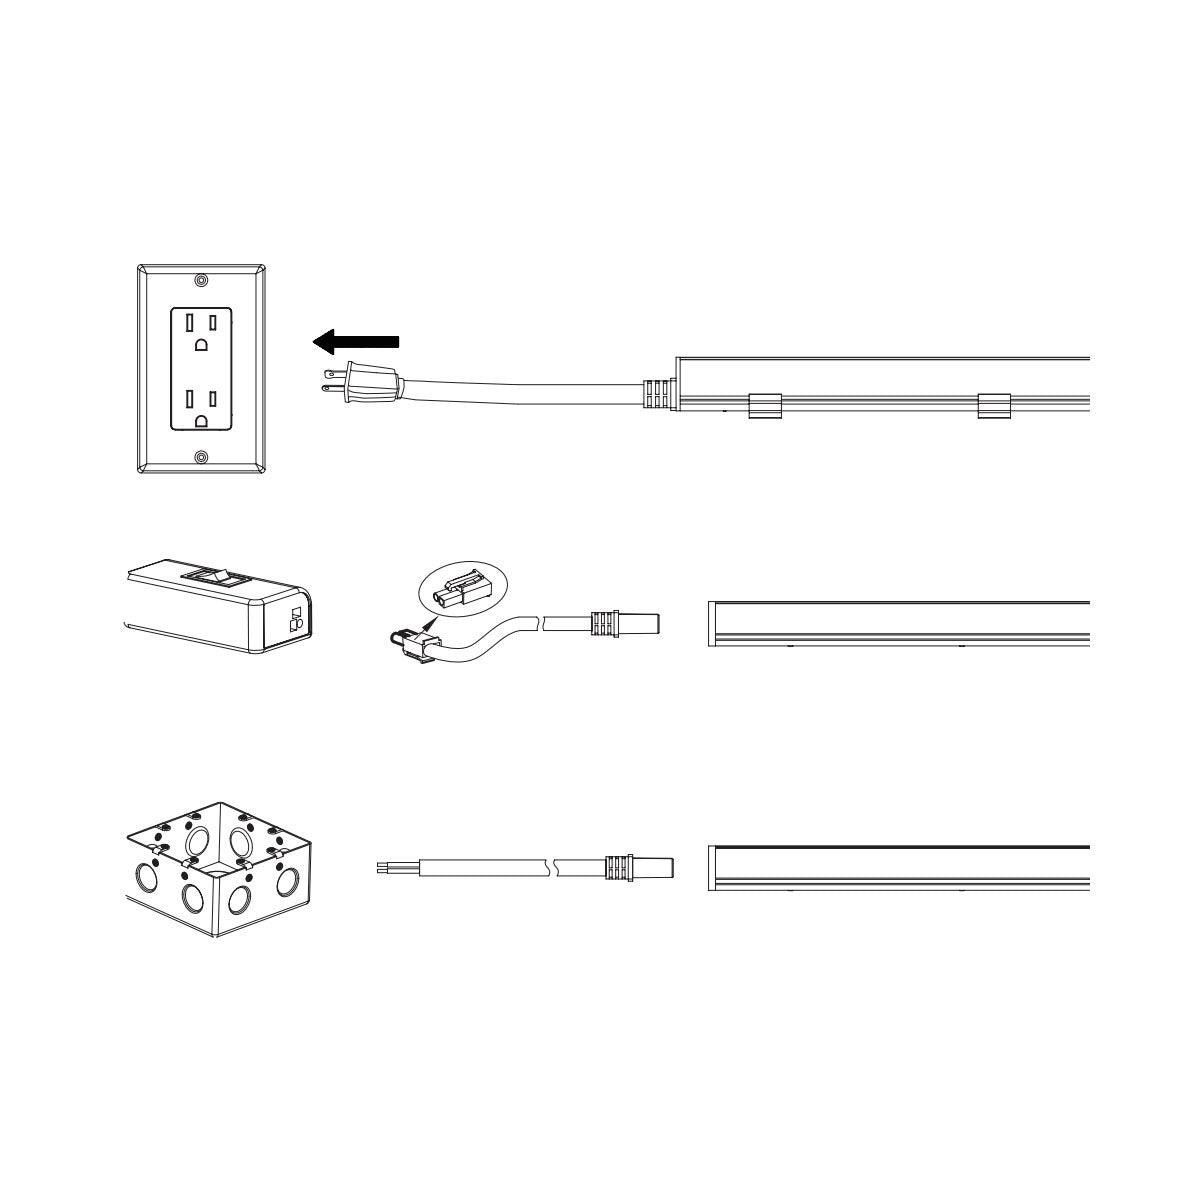 Microlink 6ft Conkit, Power cable with Molex Connection for use with ALC-BOX junction box